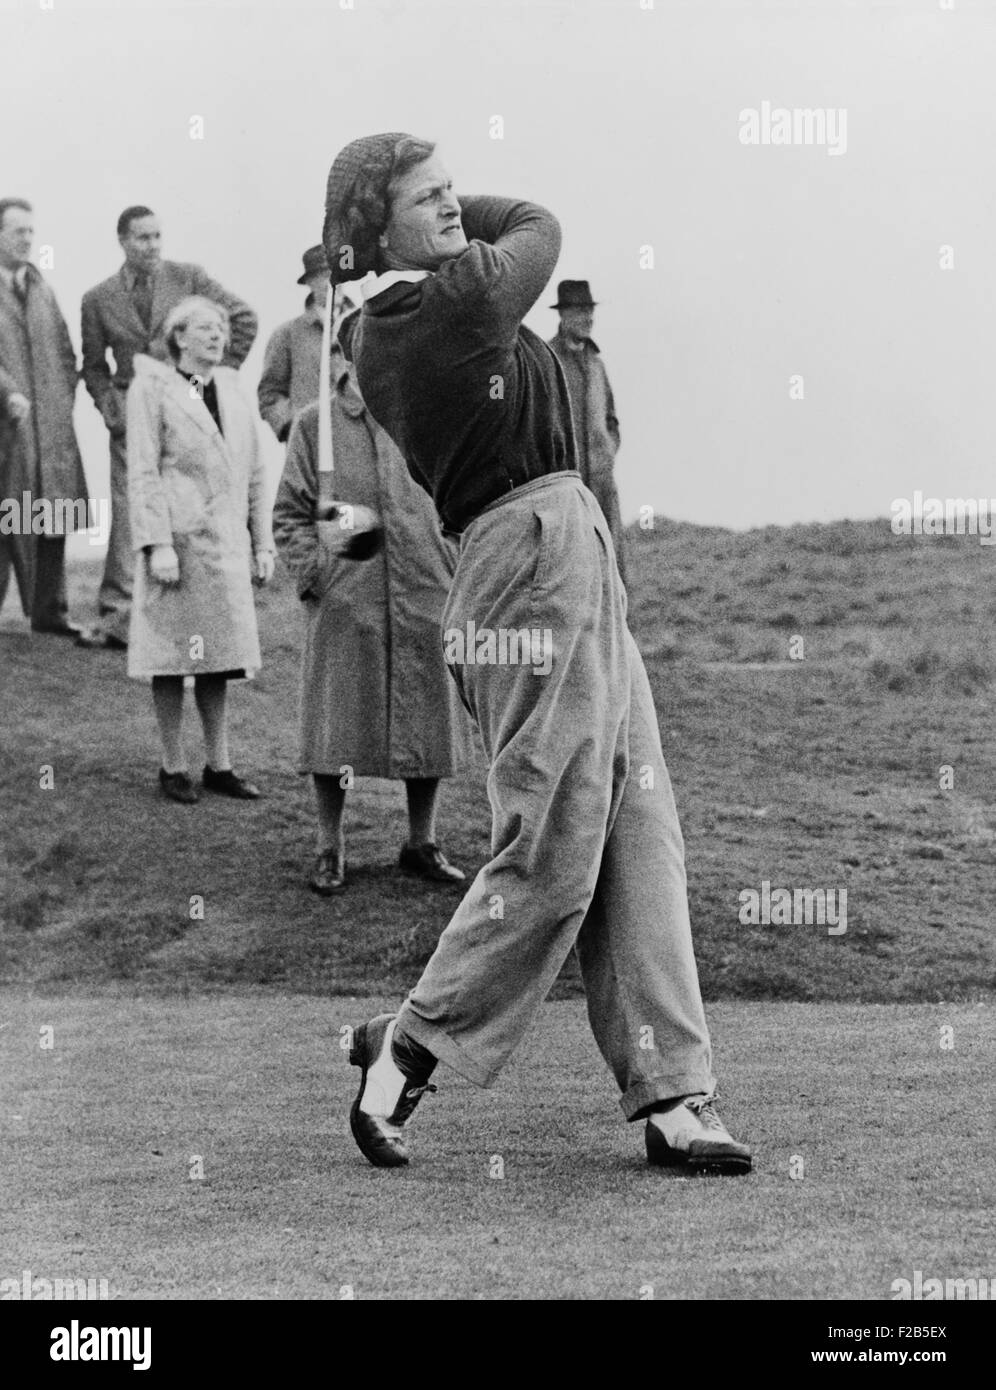 Babe Didrikson, watching golf ball as she completes her swing. The multisport athlete was playing at the Ladies Amateur Championship, Gullane, Scotland, 1947. - (BSLOC 2014 17 182) Stock Photo